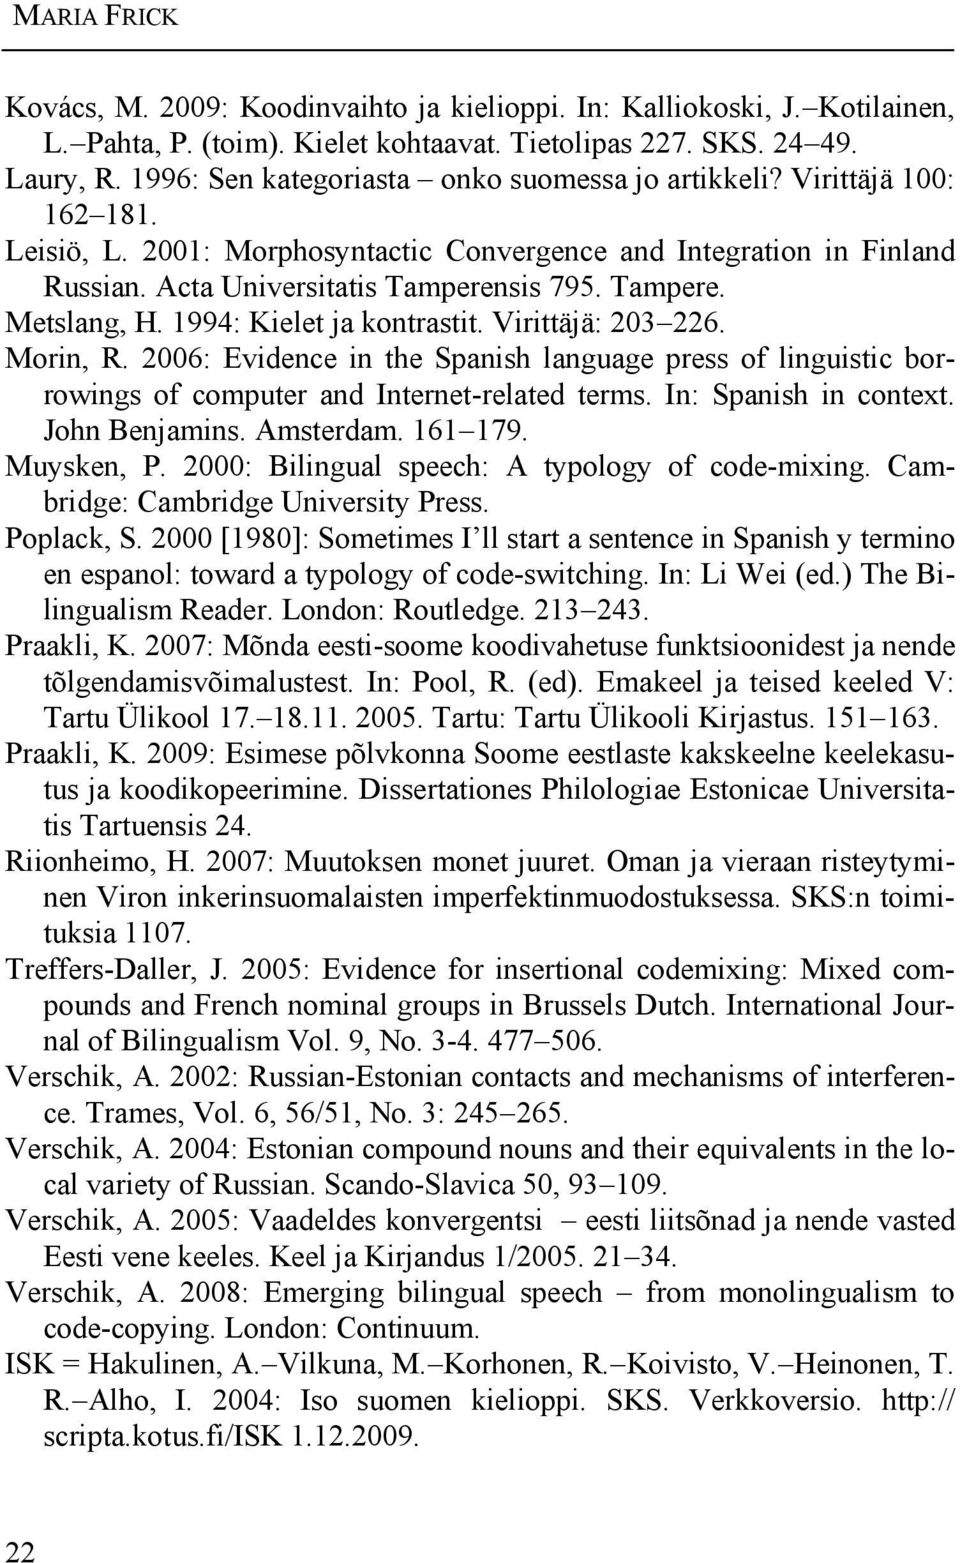 1994: Kielet ja kontrastit. Virittäjä: 203 226. Morin, R. 2006: Evidence in the Spanish language press of linguistic borrowings of computer and Internet-related terms. In: Spanish in context.